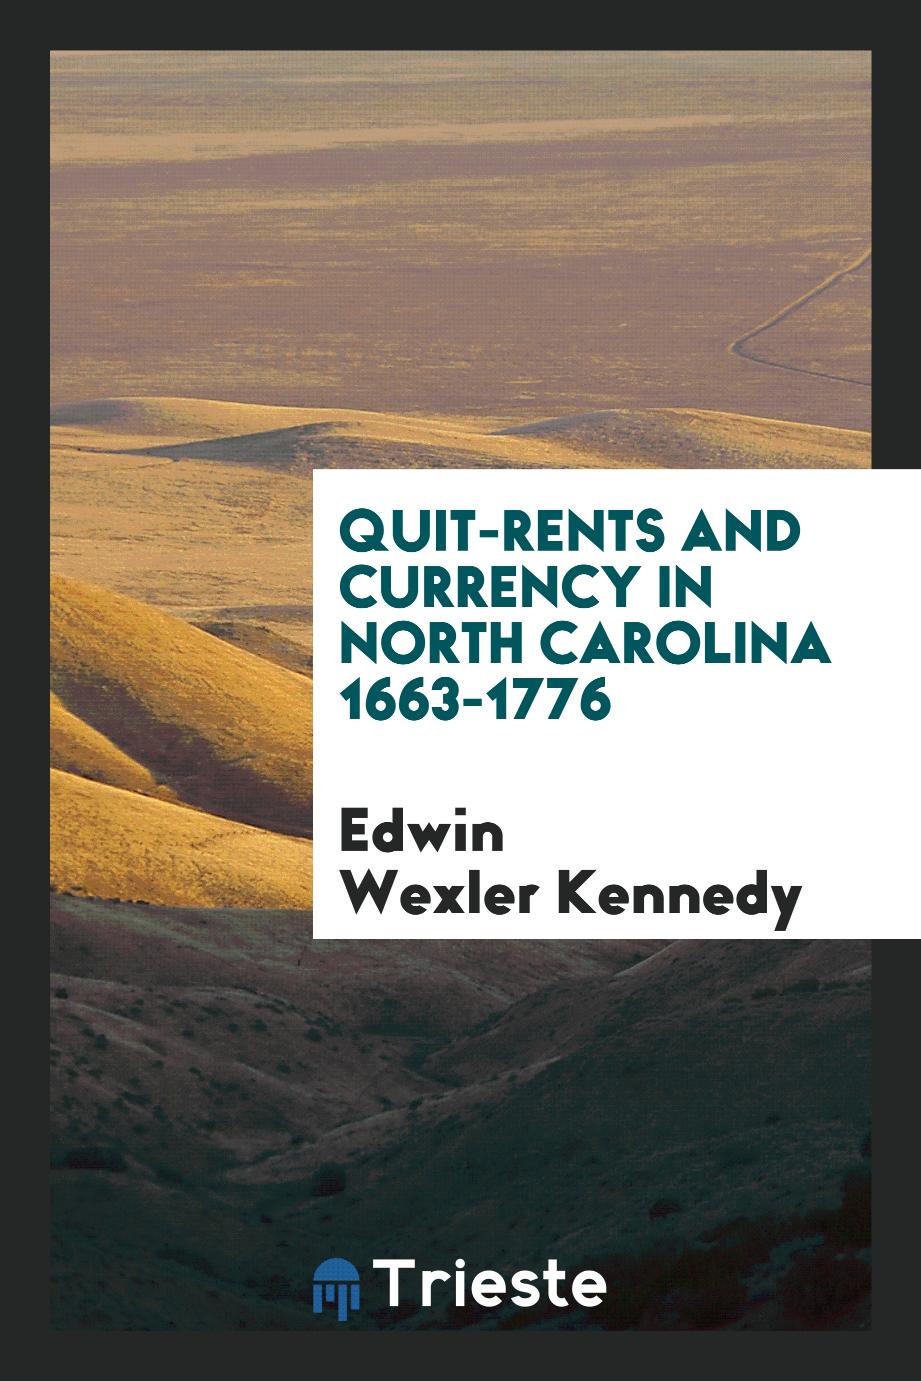 Quit-rents and currency in North Carolina 1663-1776